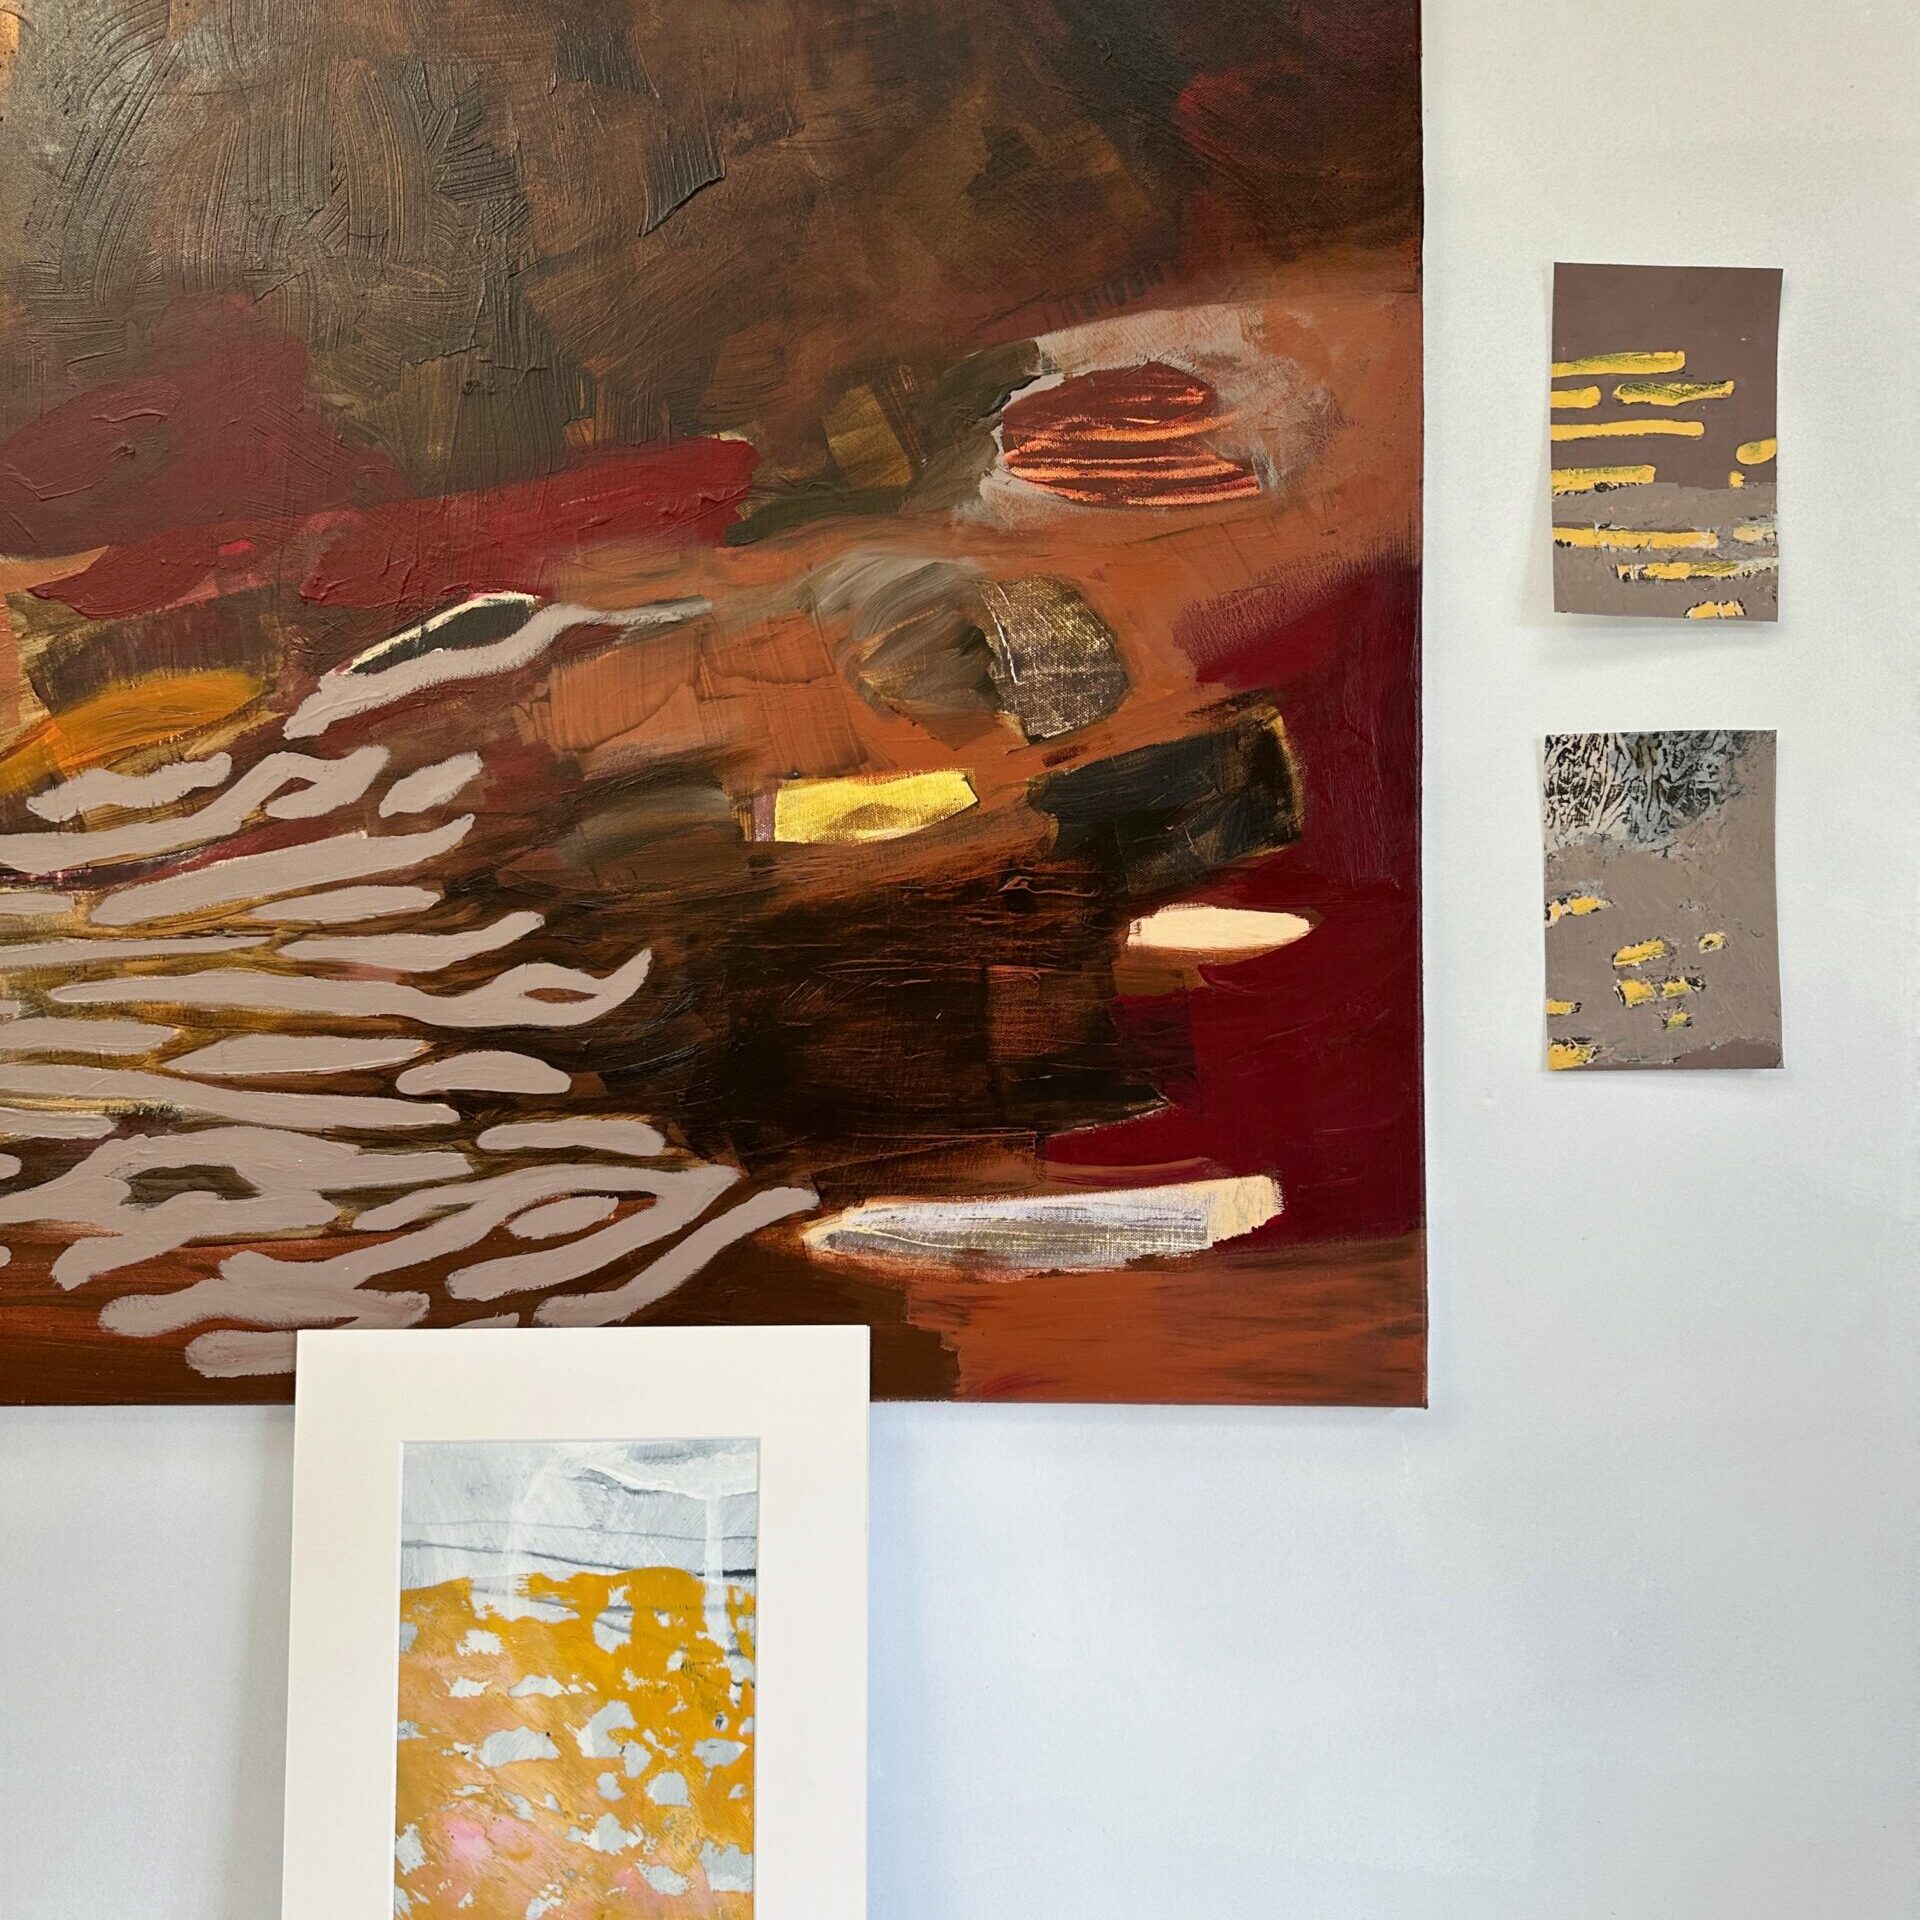 Work in progress in the studio; paintings in rusty brown and red, and yellow